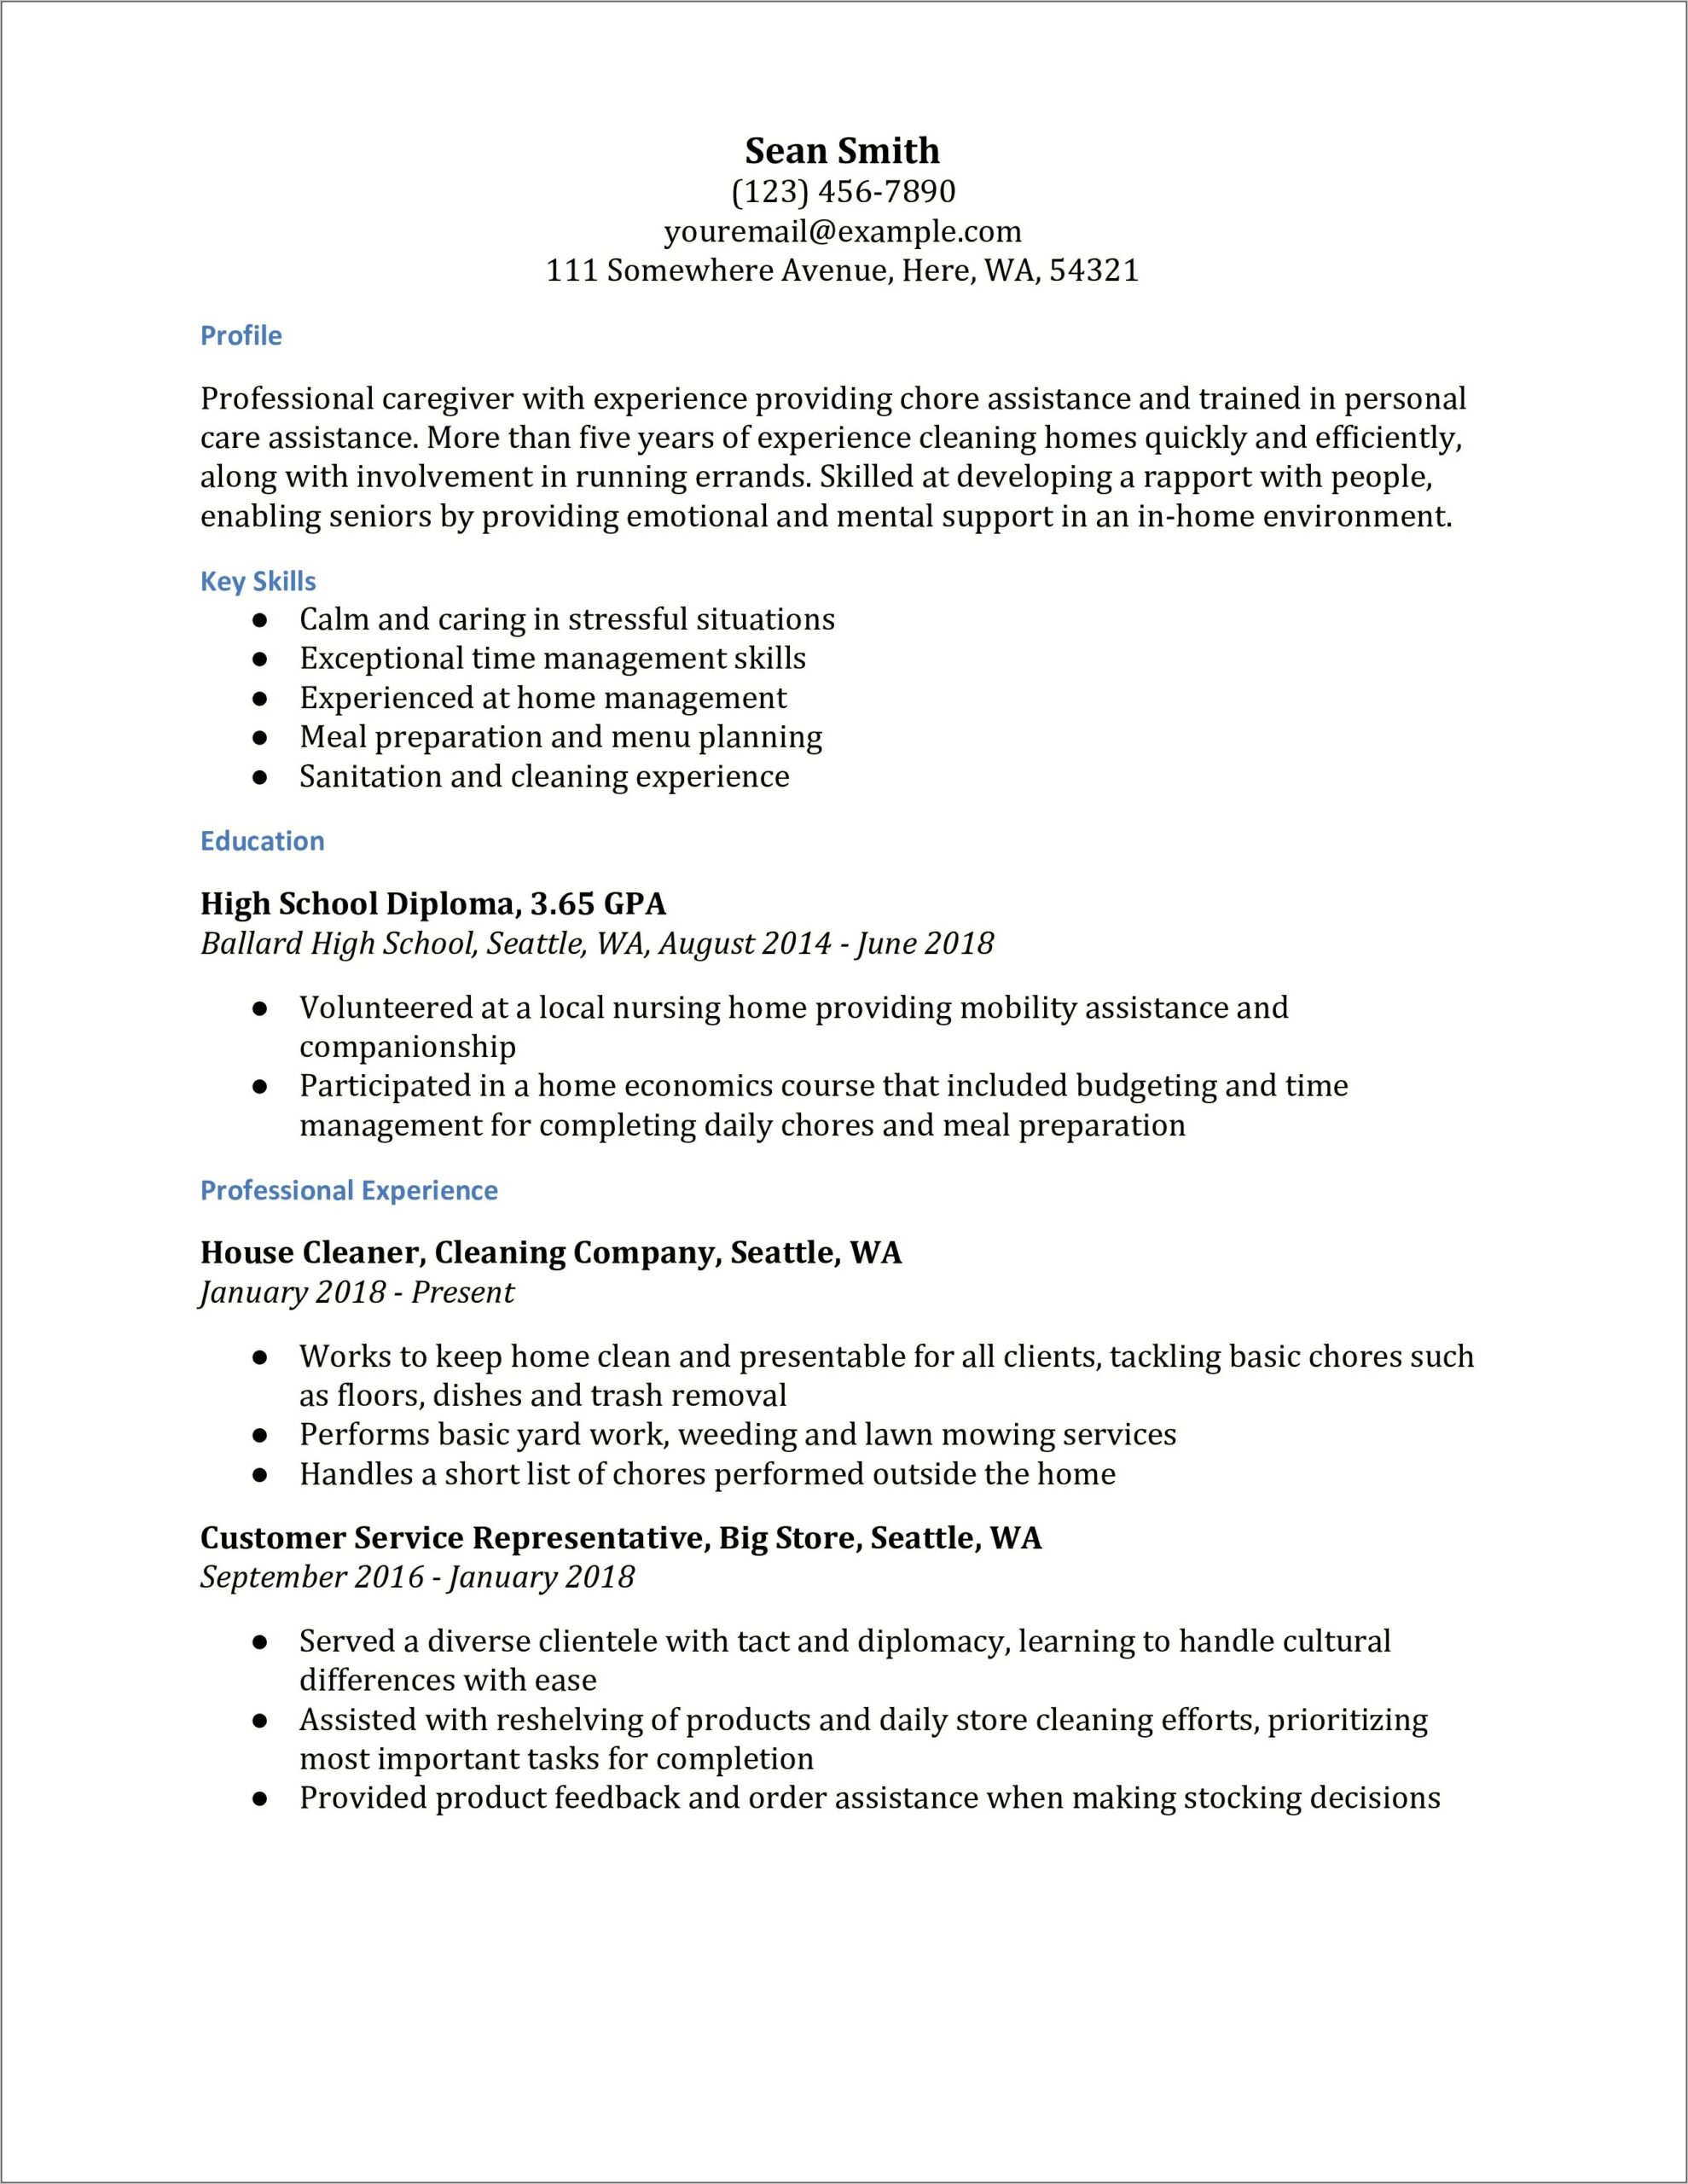 Skills On Resume For Personal Caregiver